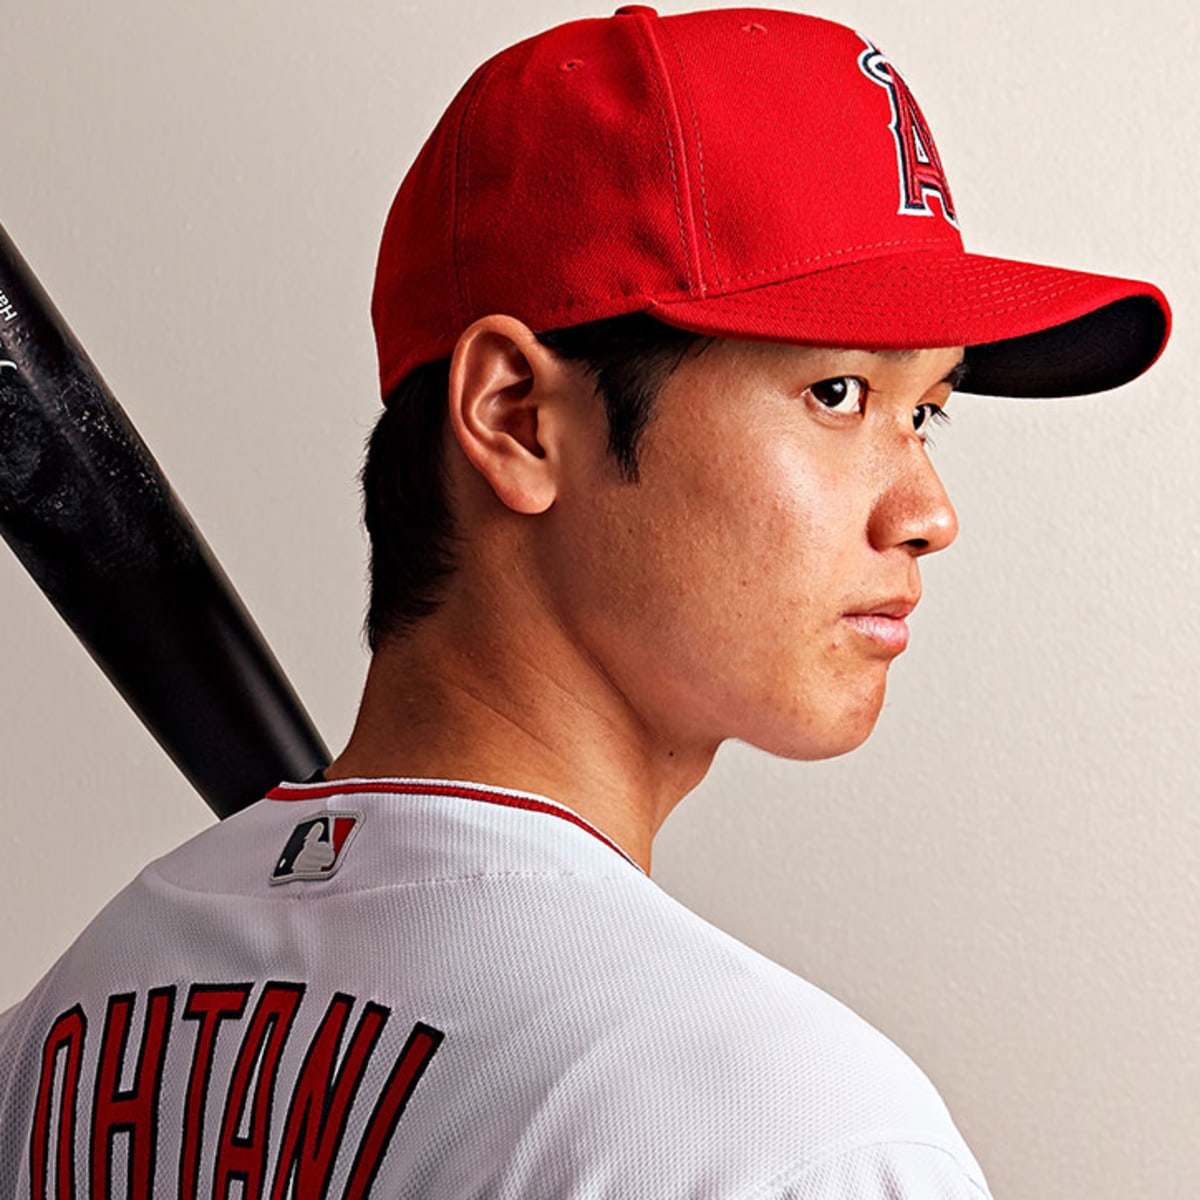 Shohei Ohtani visits former Fighters teammates at spring camp